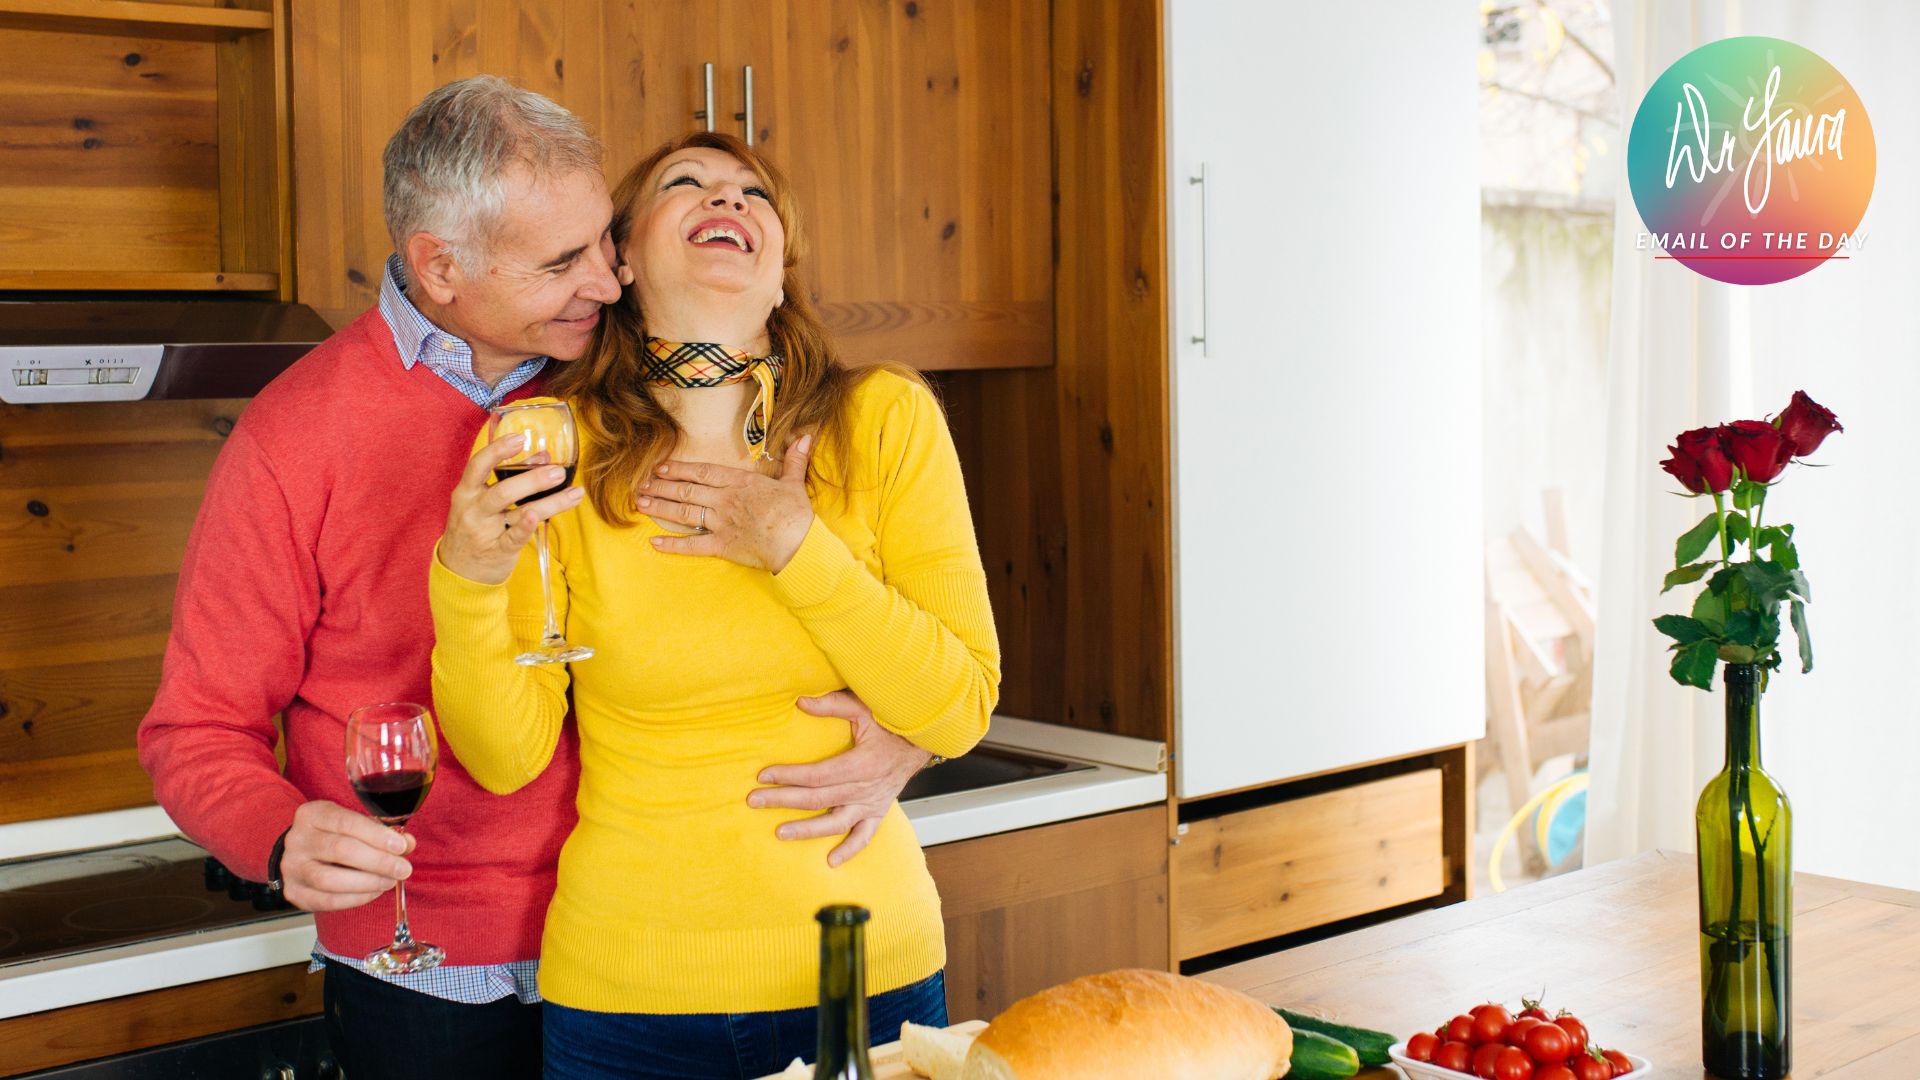 Man in red sweater embraces laughing woman from behind while they both hold wine glasses